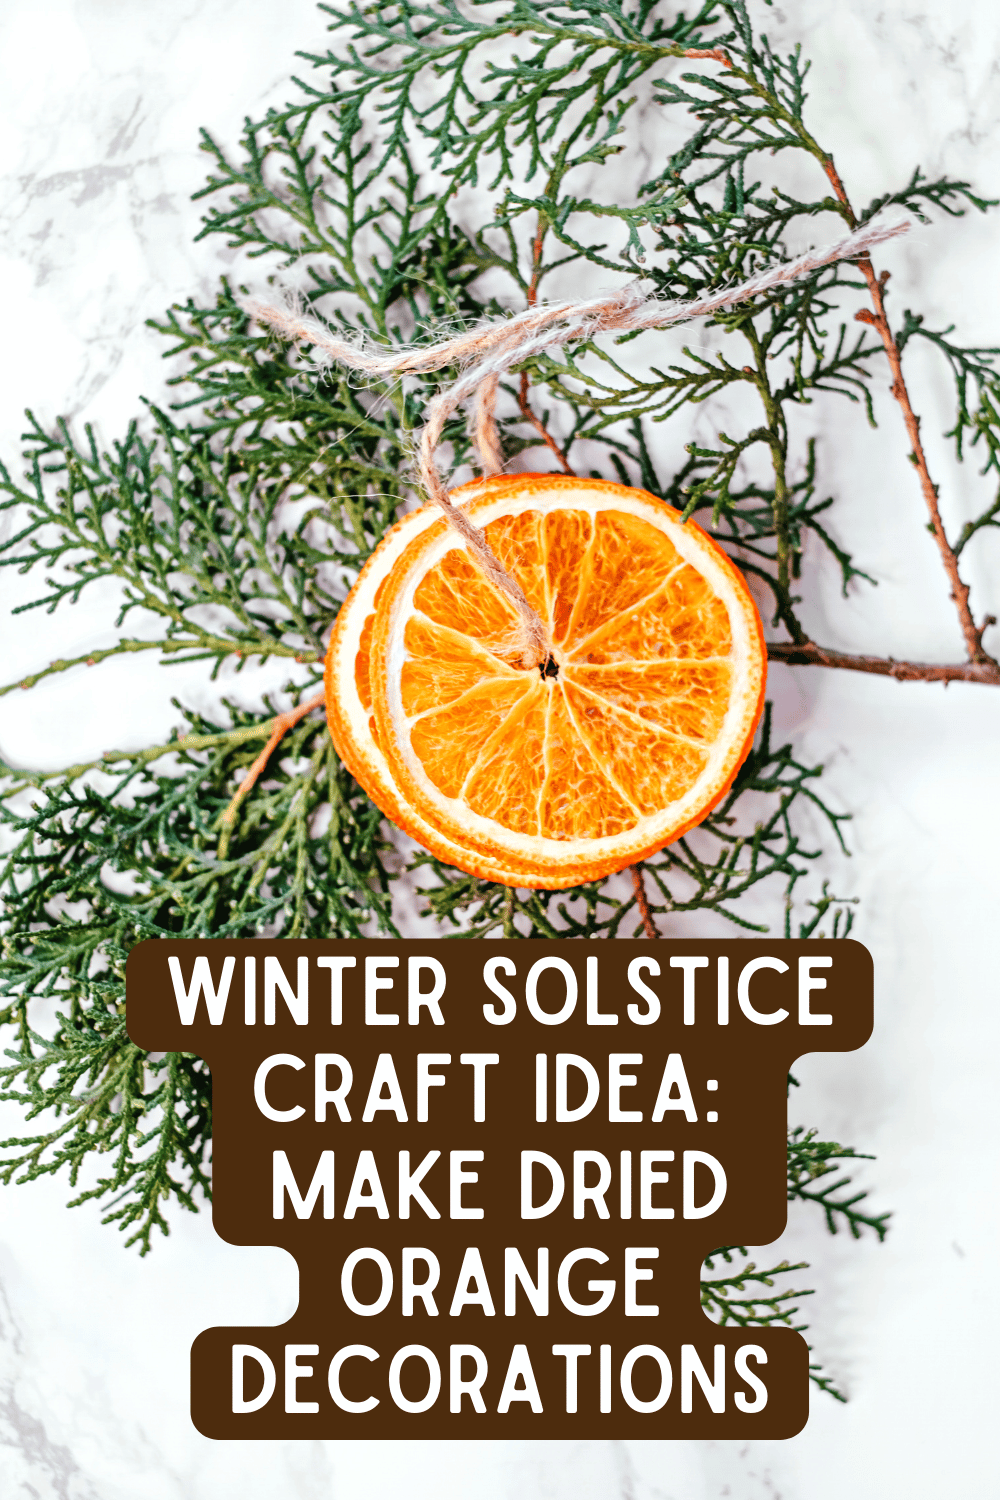 Winter Solstice Craft Projects Ideas - Dried Oranges Solstice Decor